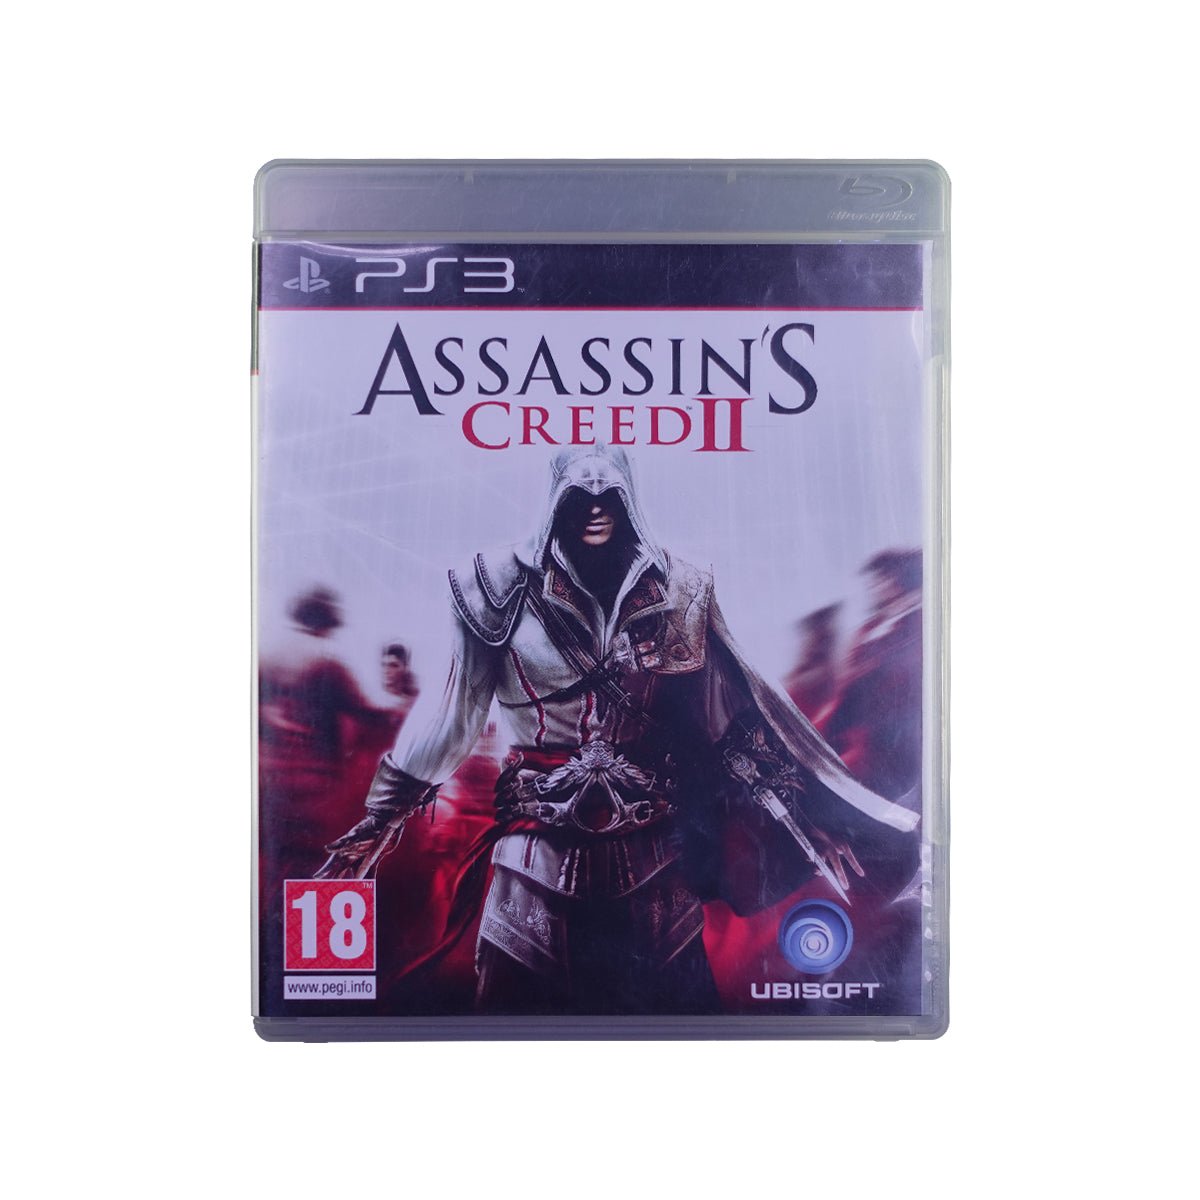 (Pre-Owned) Assassin's Creed II - PlayStation 3 - ريترو - Store 974 | ستور ٩٧٤